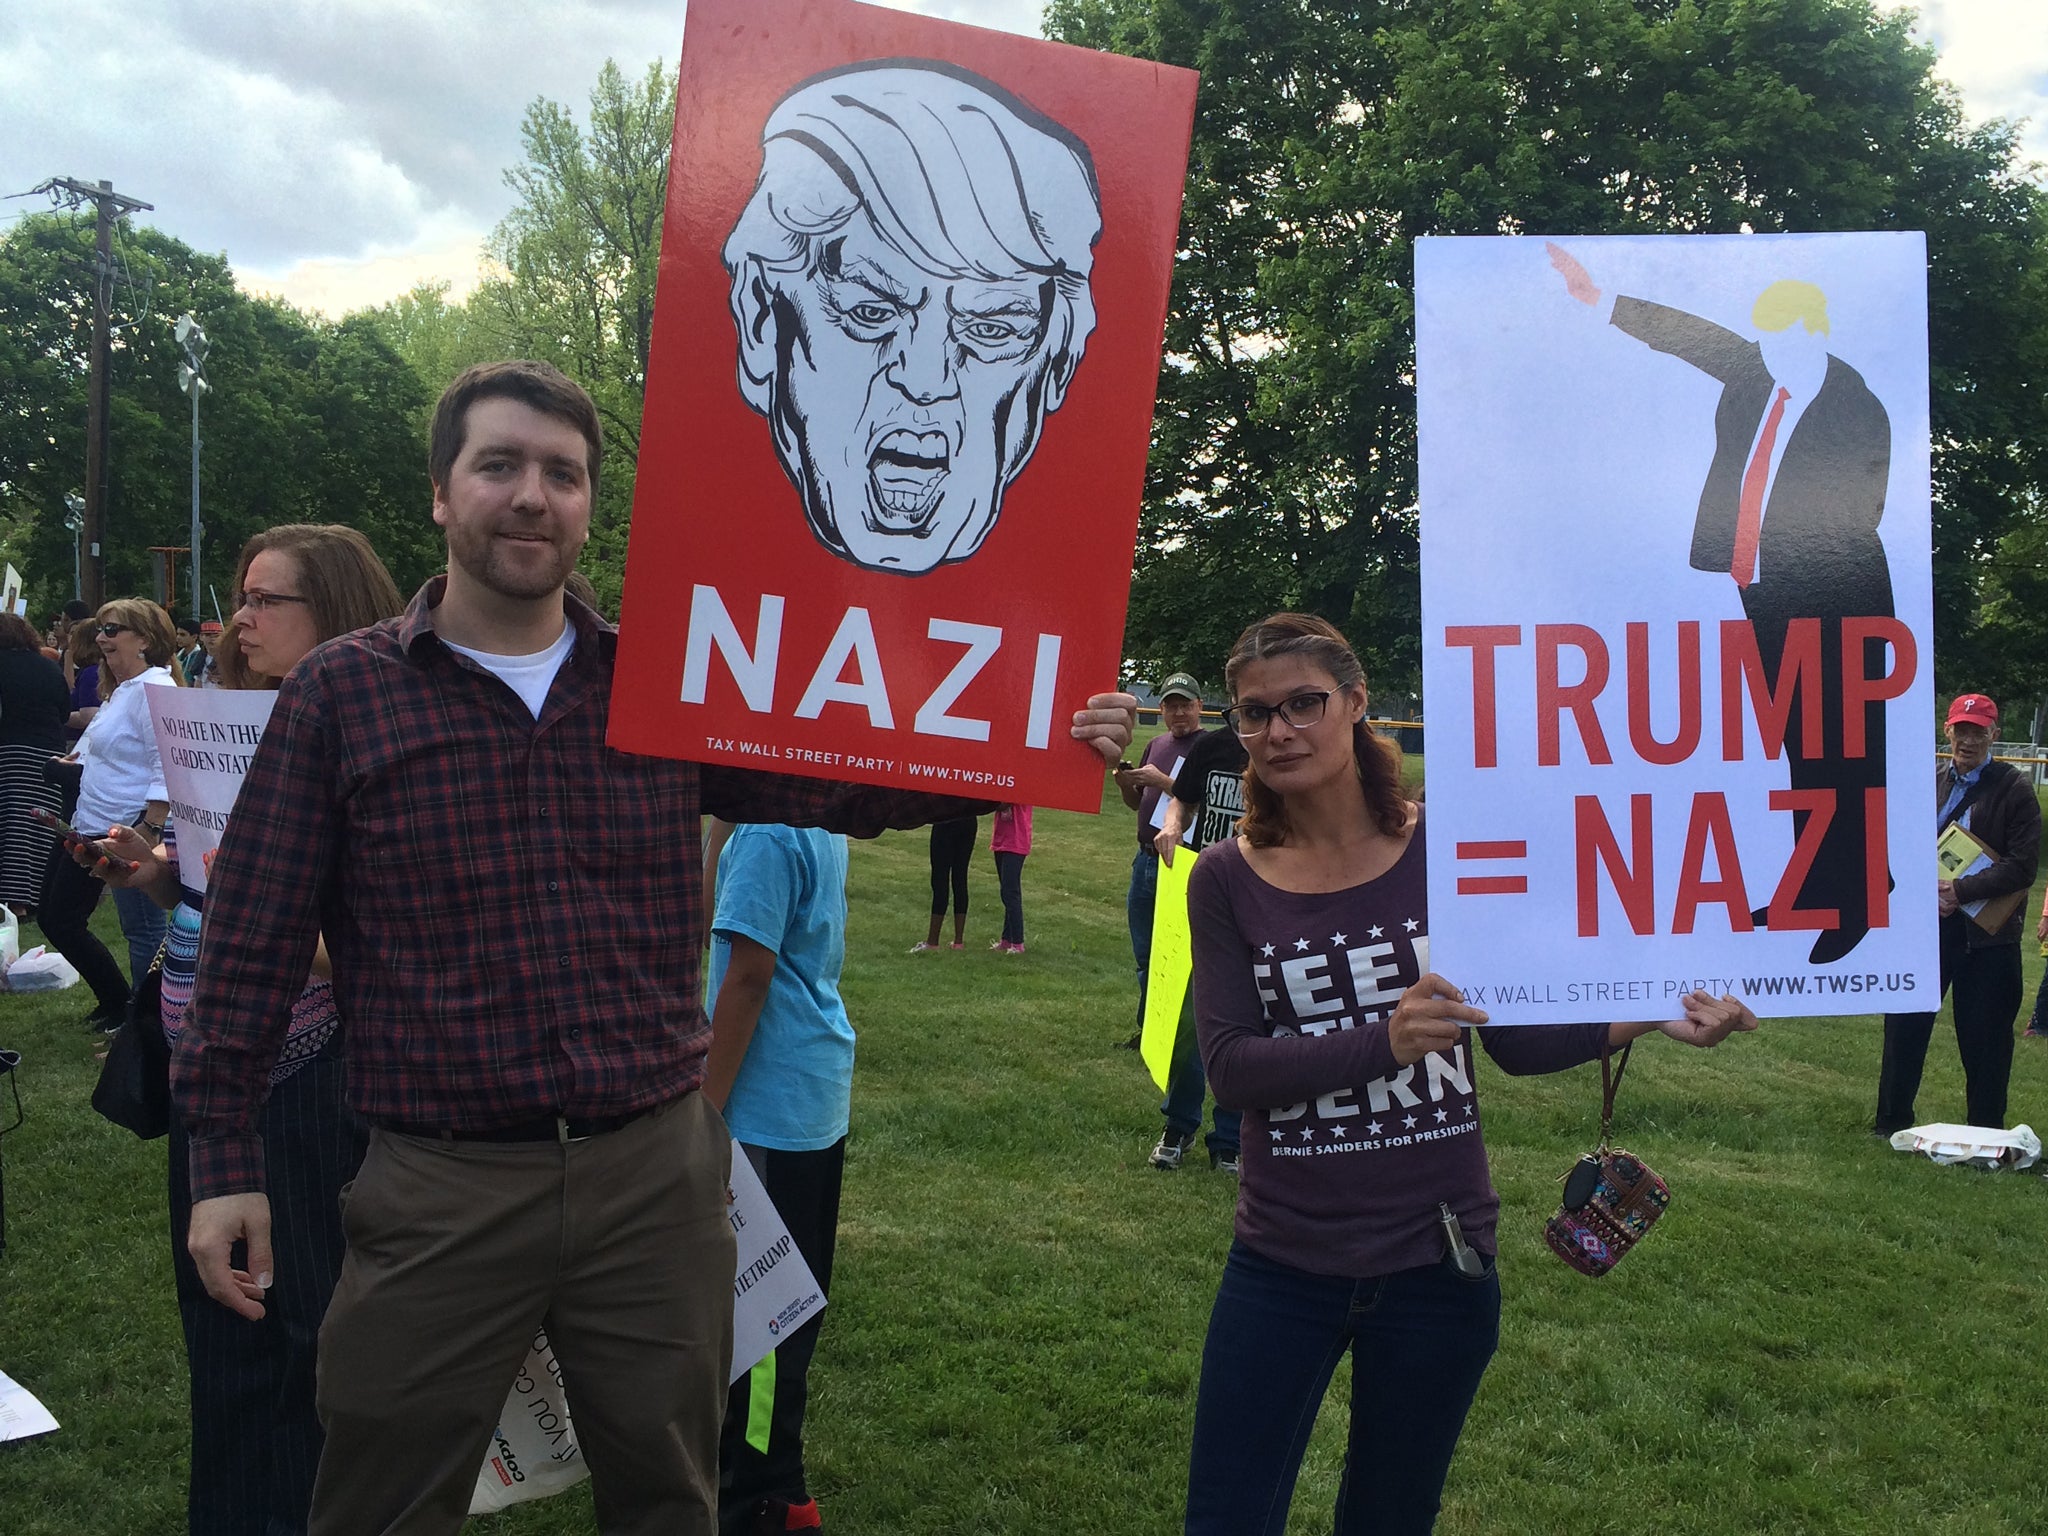 Chris Reith and Dalicia Luna see many parallels between 1930s Germany and Trump's rise (Feliks Garcia)